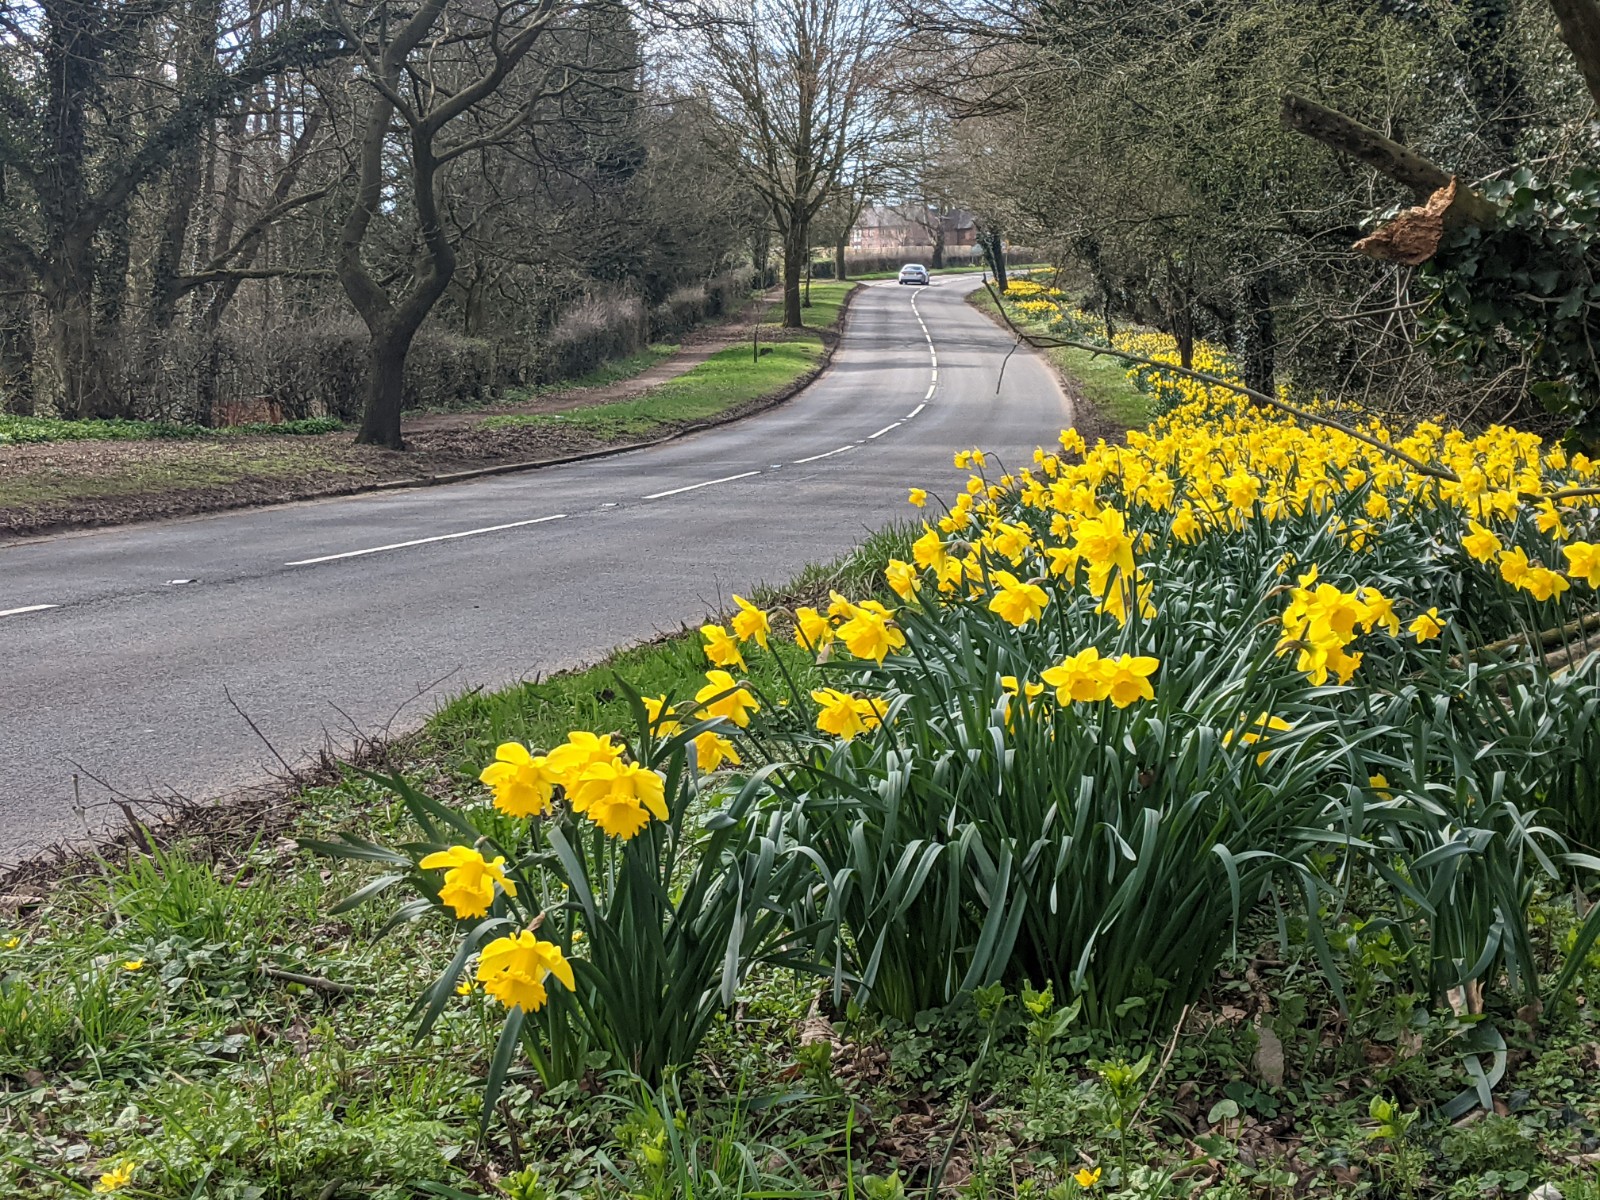 Daffodils on North Approach to the village, March 25th